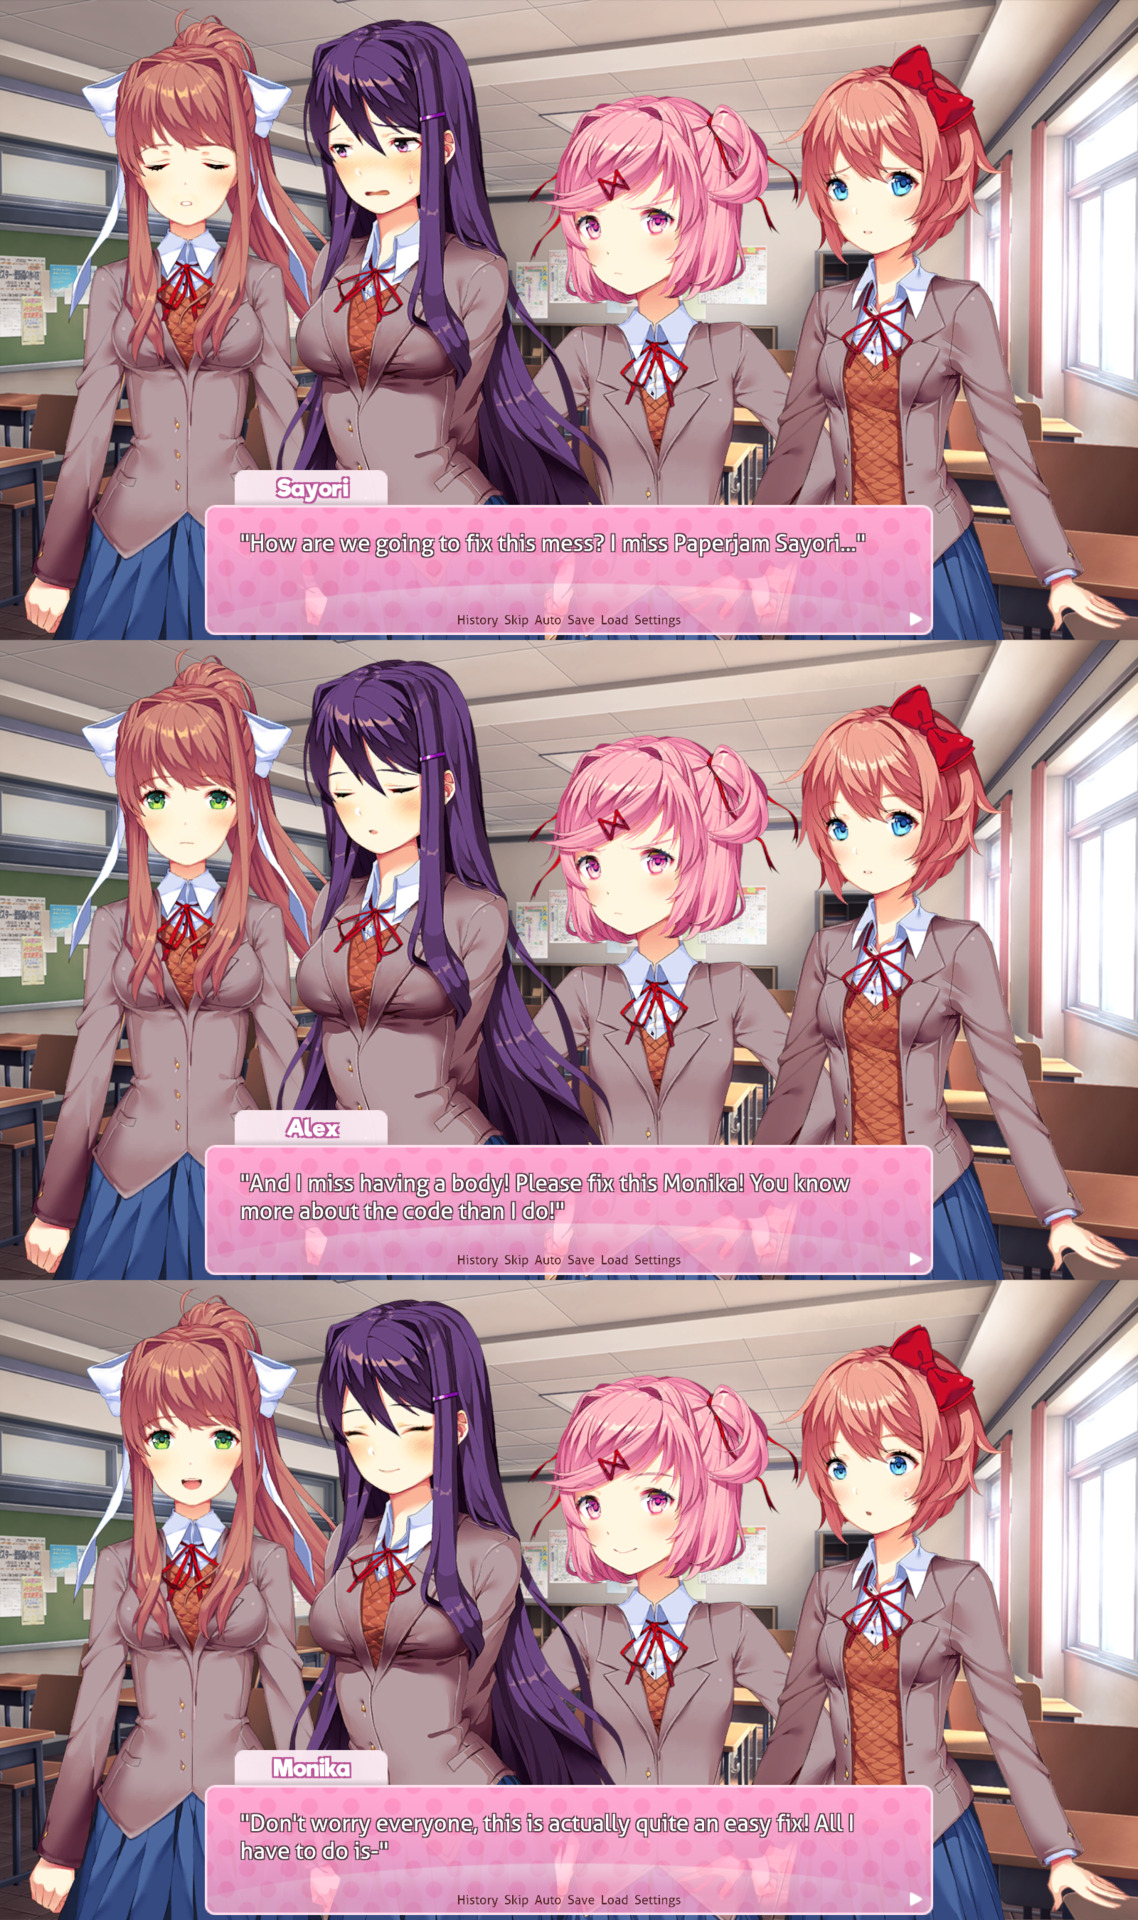 “Hopefully this next Sayori will listen to the... - Welcome to the Derp